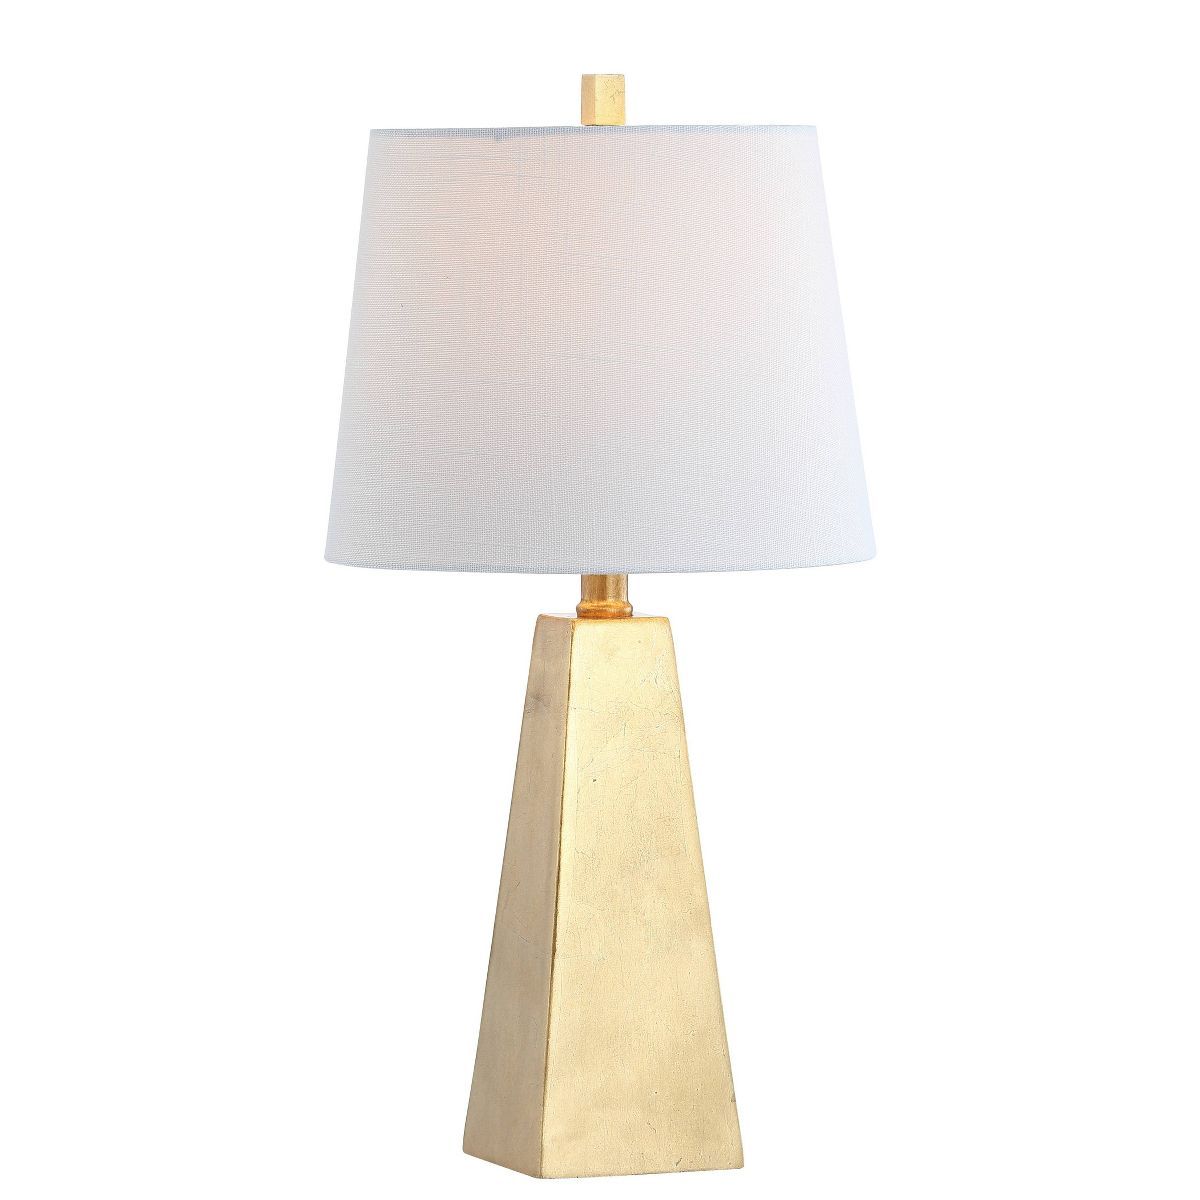 20.5" Alexis Resin Table Lamp (Includes LED Light Bulb) Gold - JONATHAN Y | Target